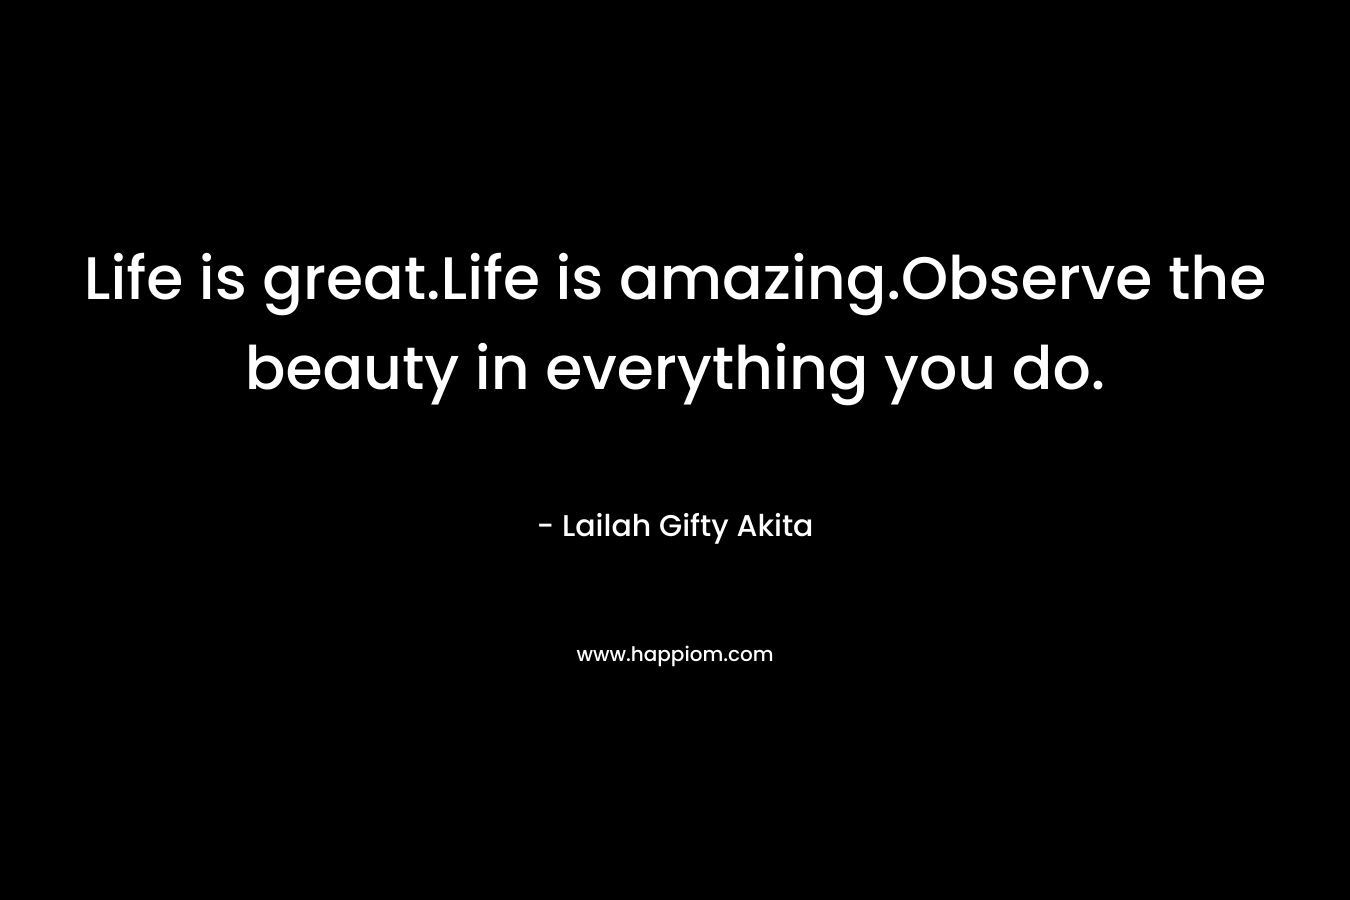 Life is great.Life is amazing.Observe the beauty in everything you do. – Lailah Gifty Akita